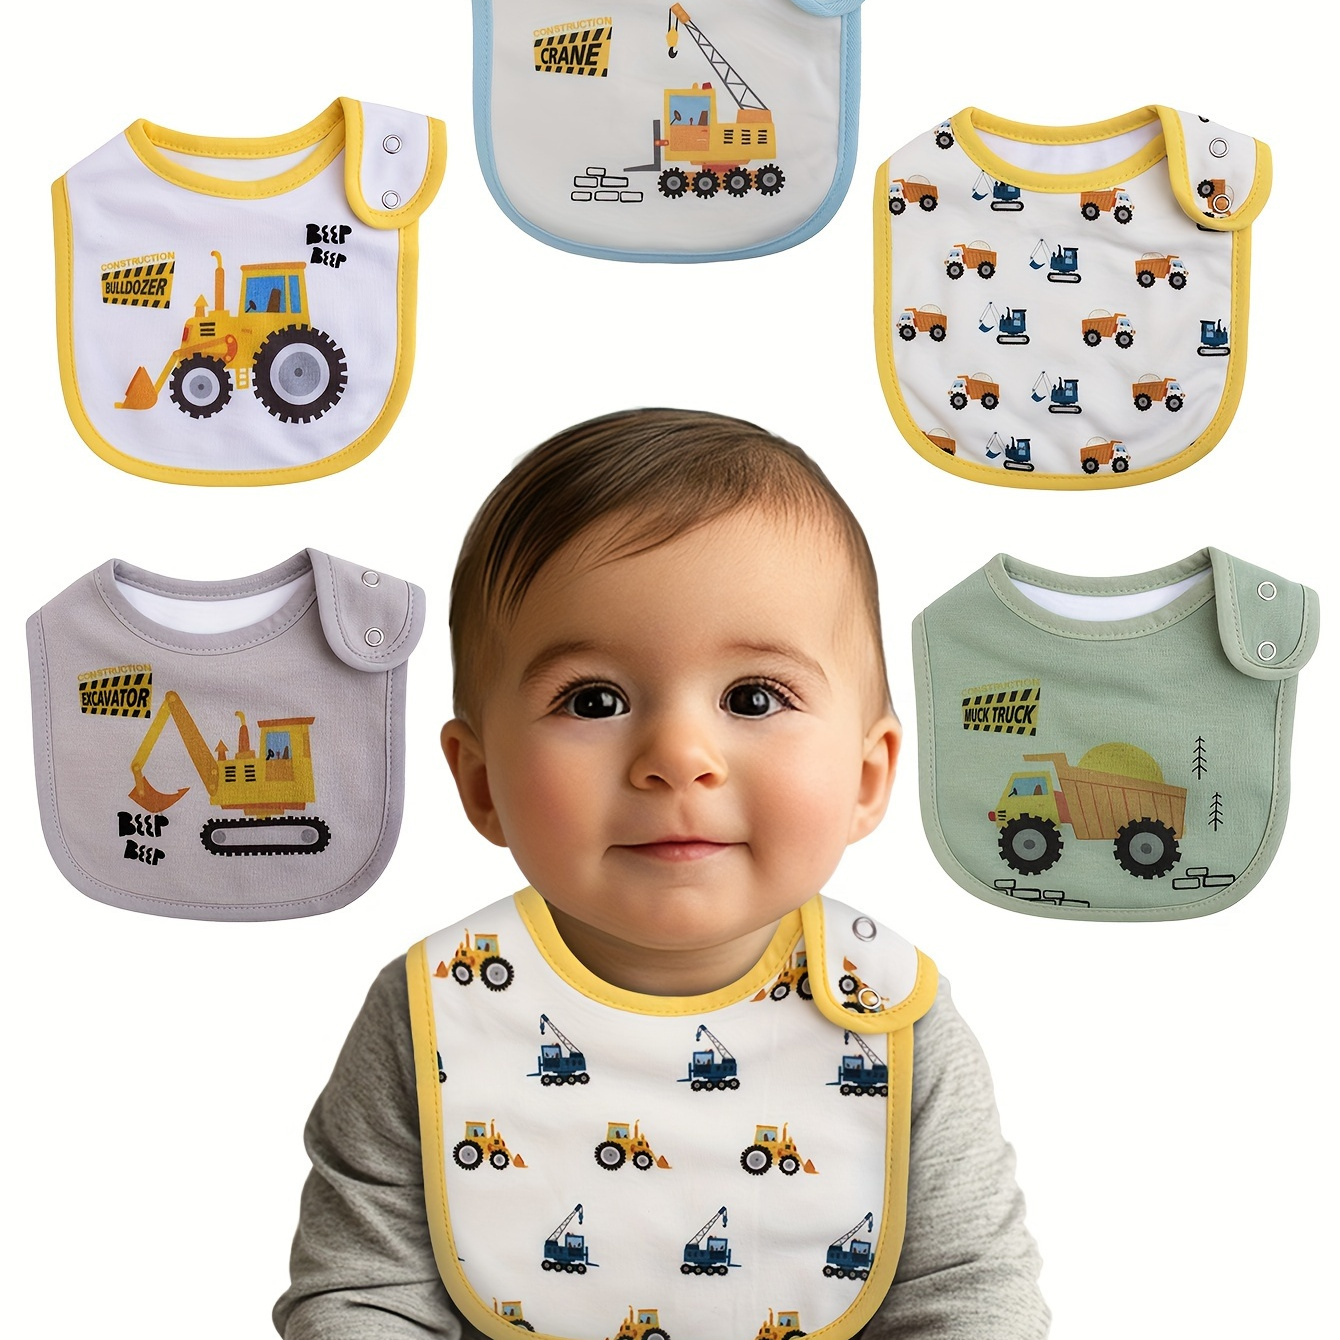 

6-piece Set Of Cartoon-printed, Adjustable Snap-on Waterproof Feeding Bibs For Boys And Girls, Suitable For Spring, Summer, Autumn, And Winter.